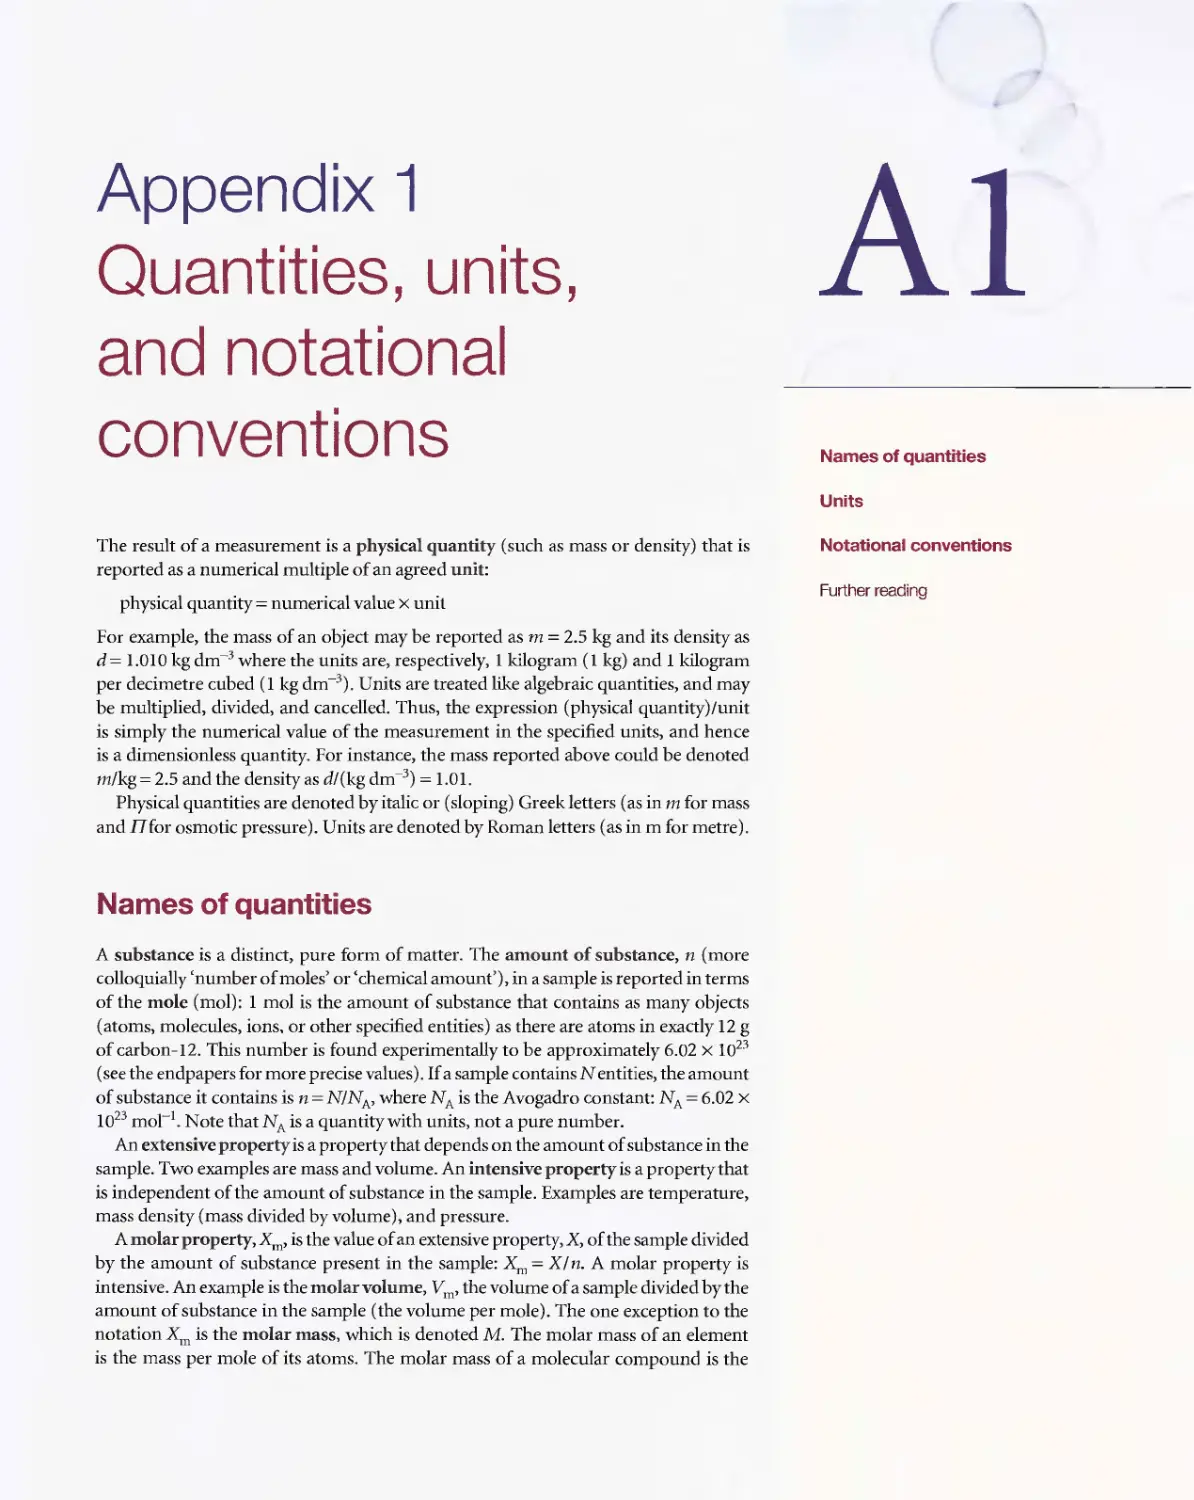 Appendix 1 - Quantities, units and notational conventions